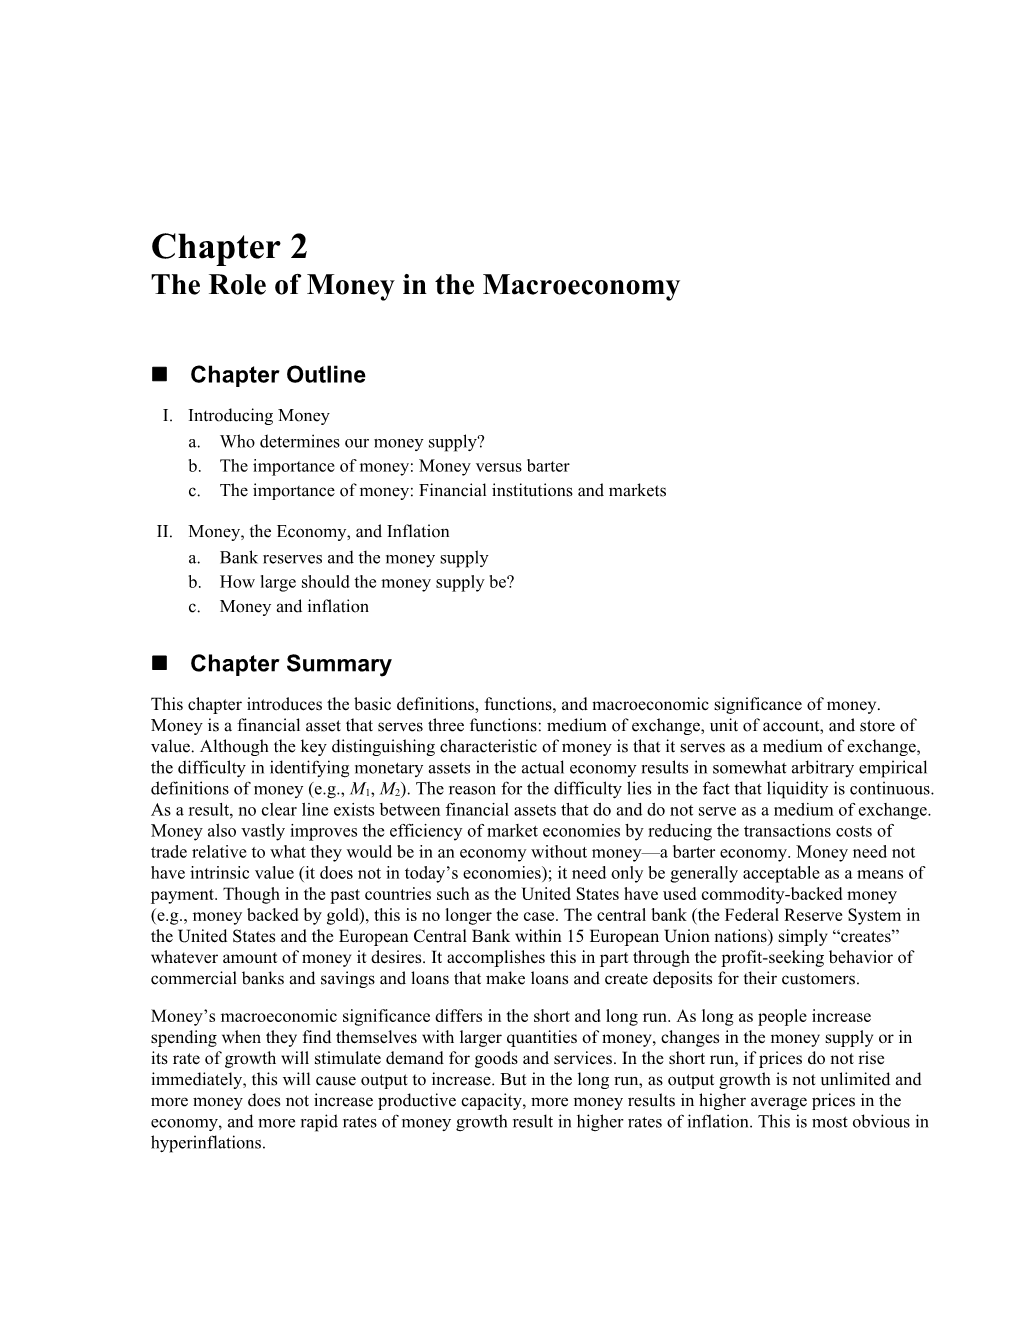 Chapter 2 the Role of Money in the Macroeconomy